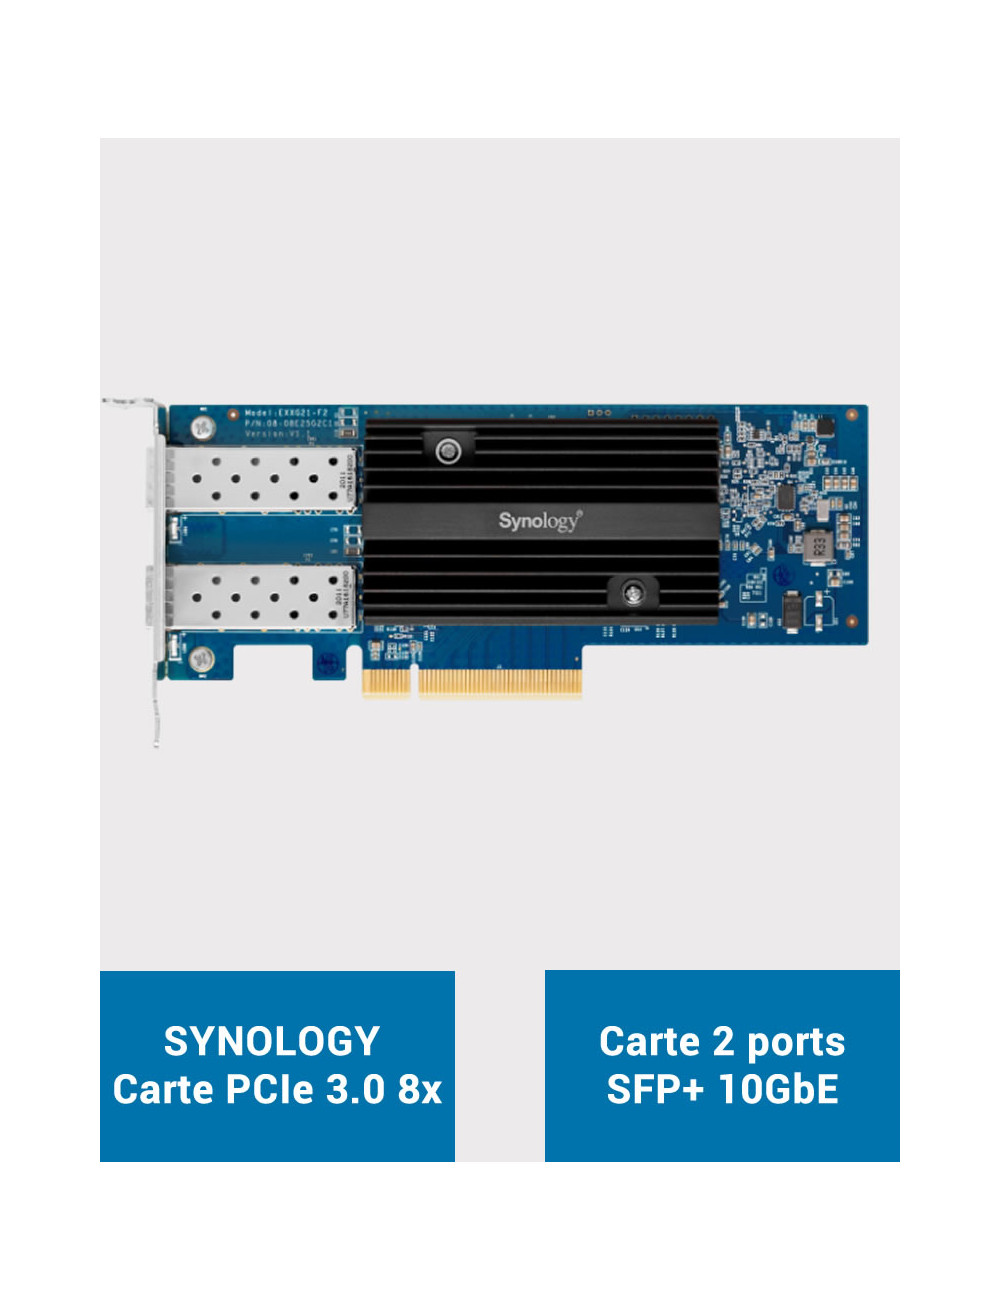 Synology Carte d'extension 2 ports 10GBE SFP+